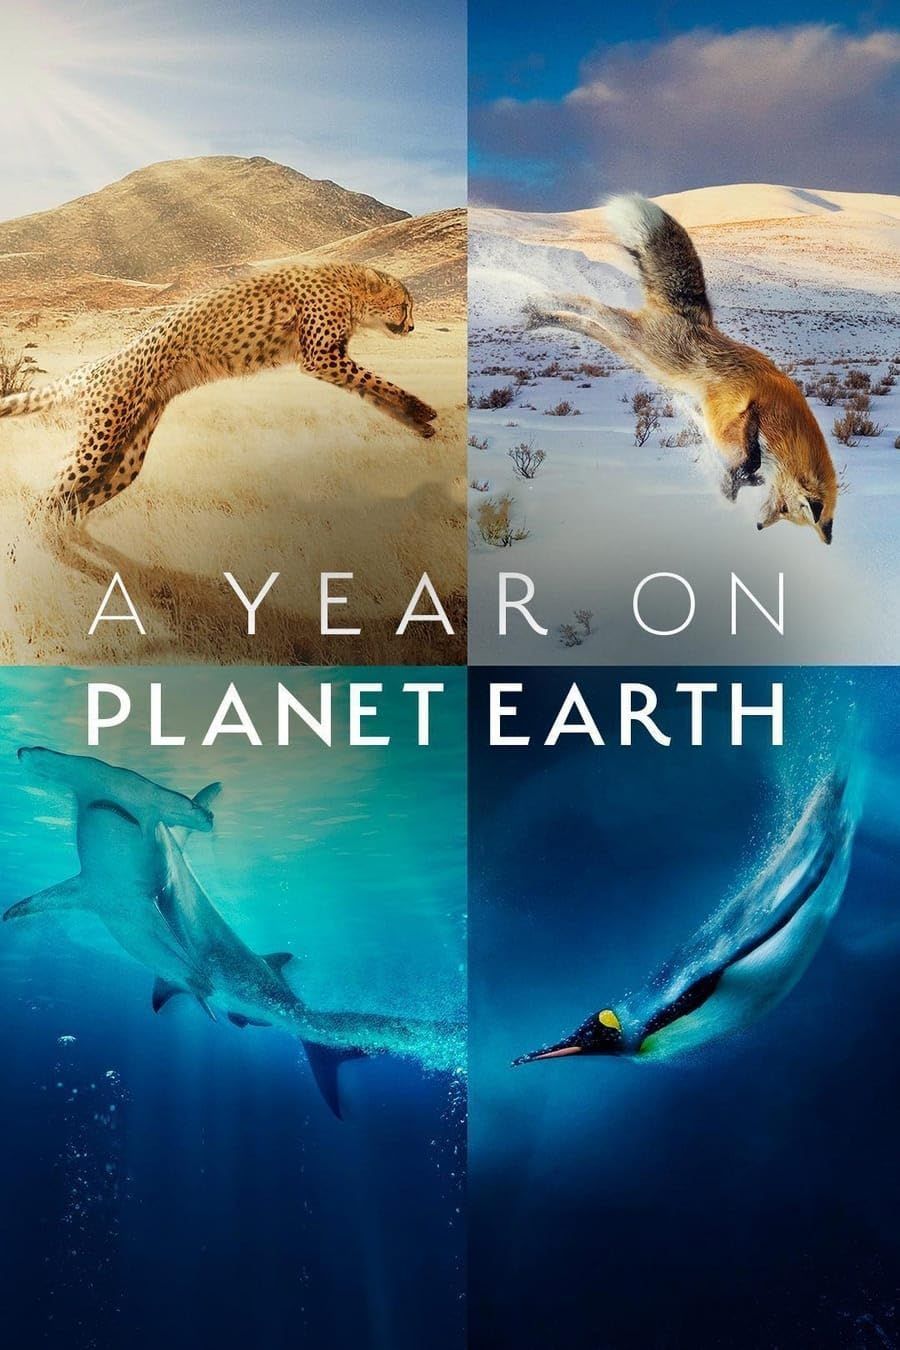 A Year on Planet Earth (Season1) 2022 Hindi Dubbed HDRip download full movie